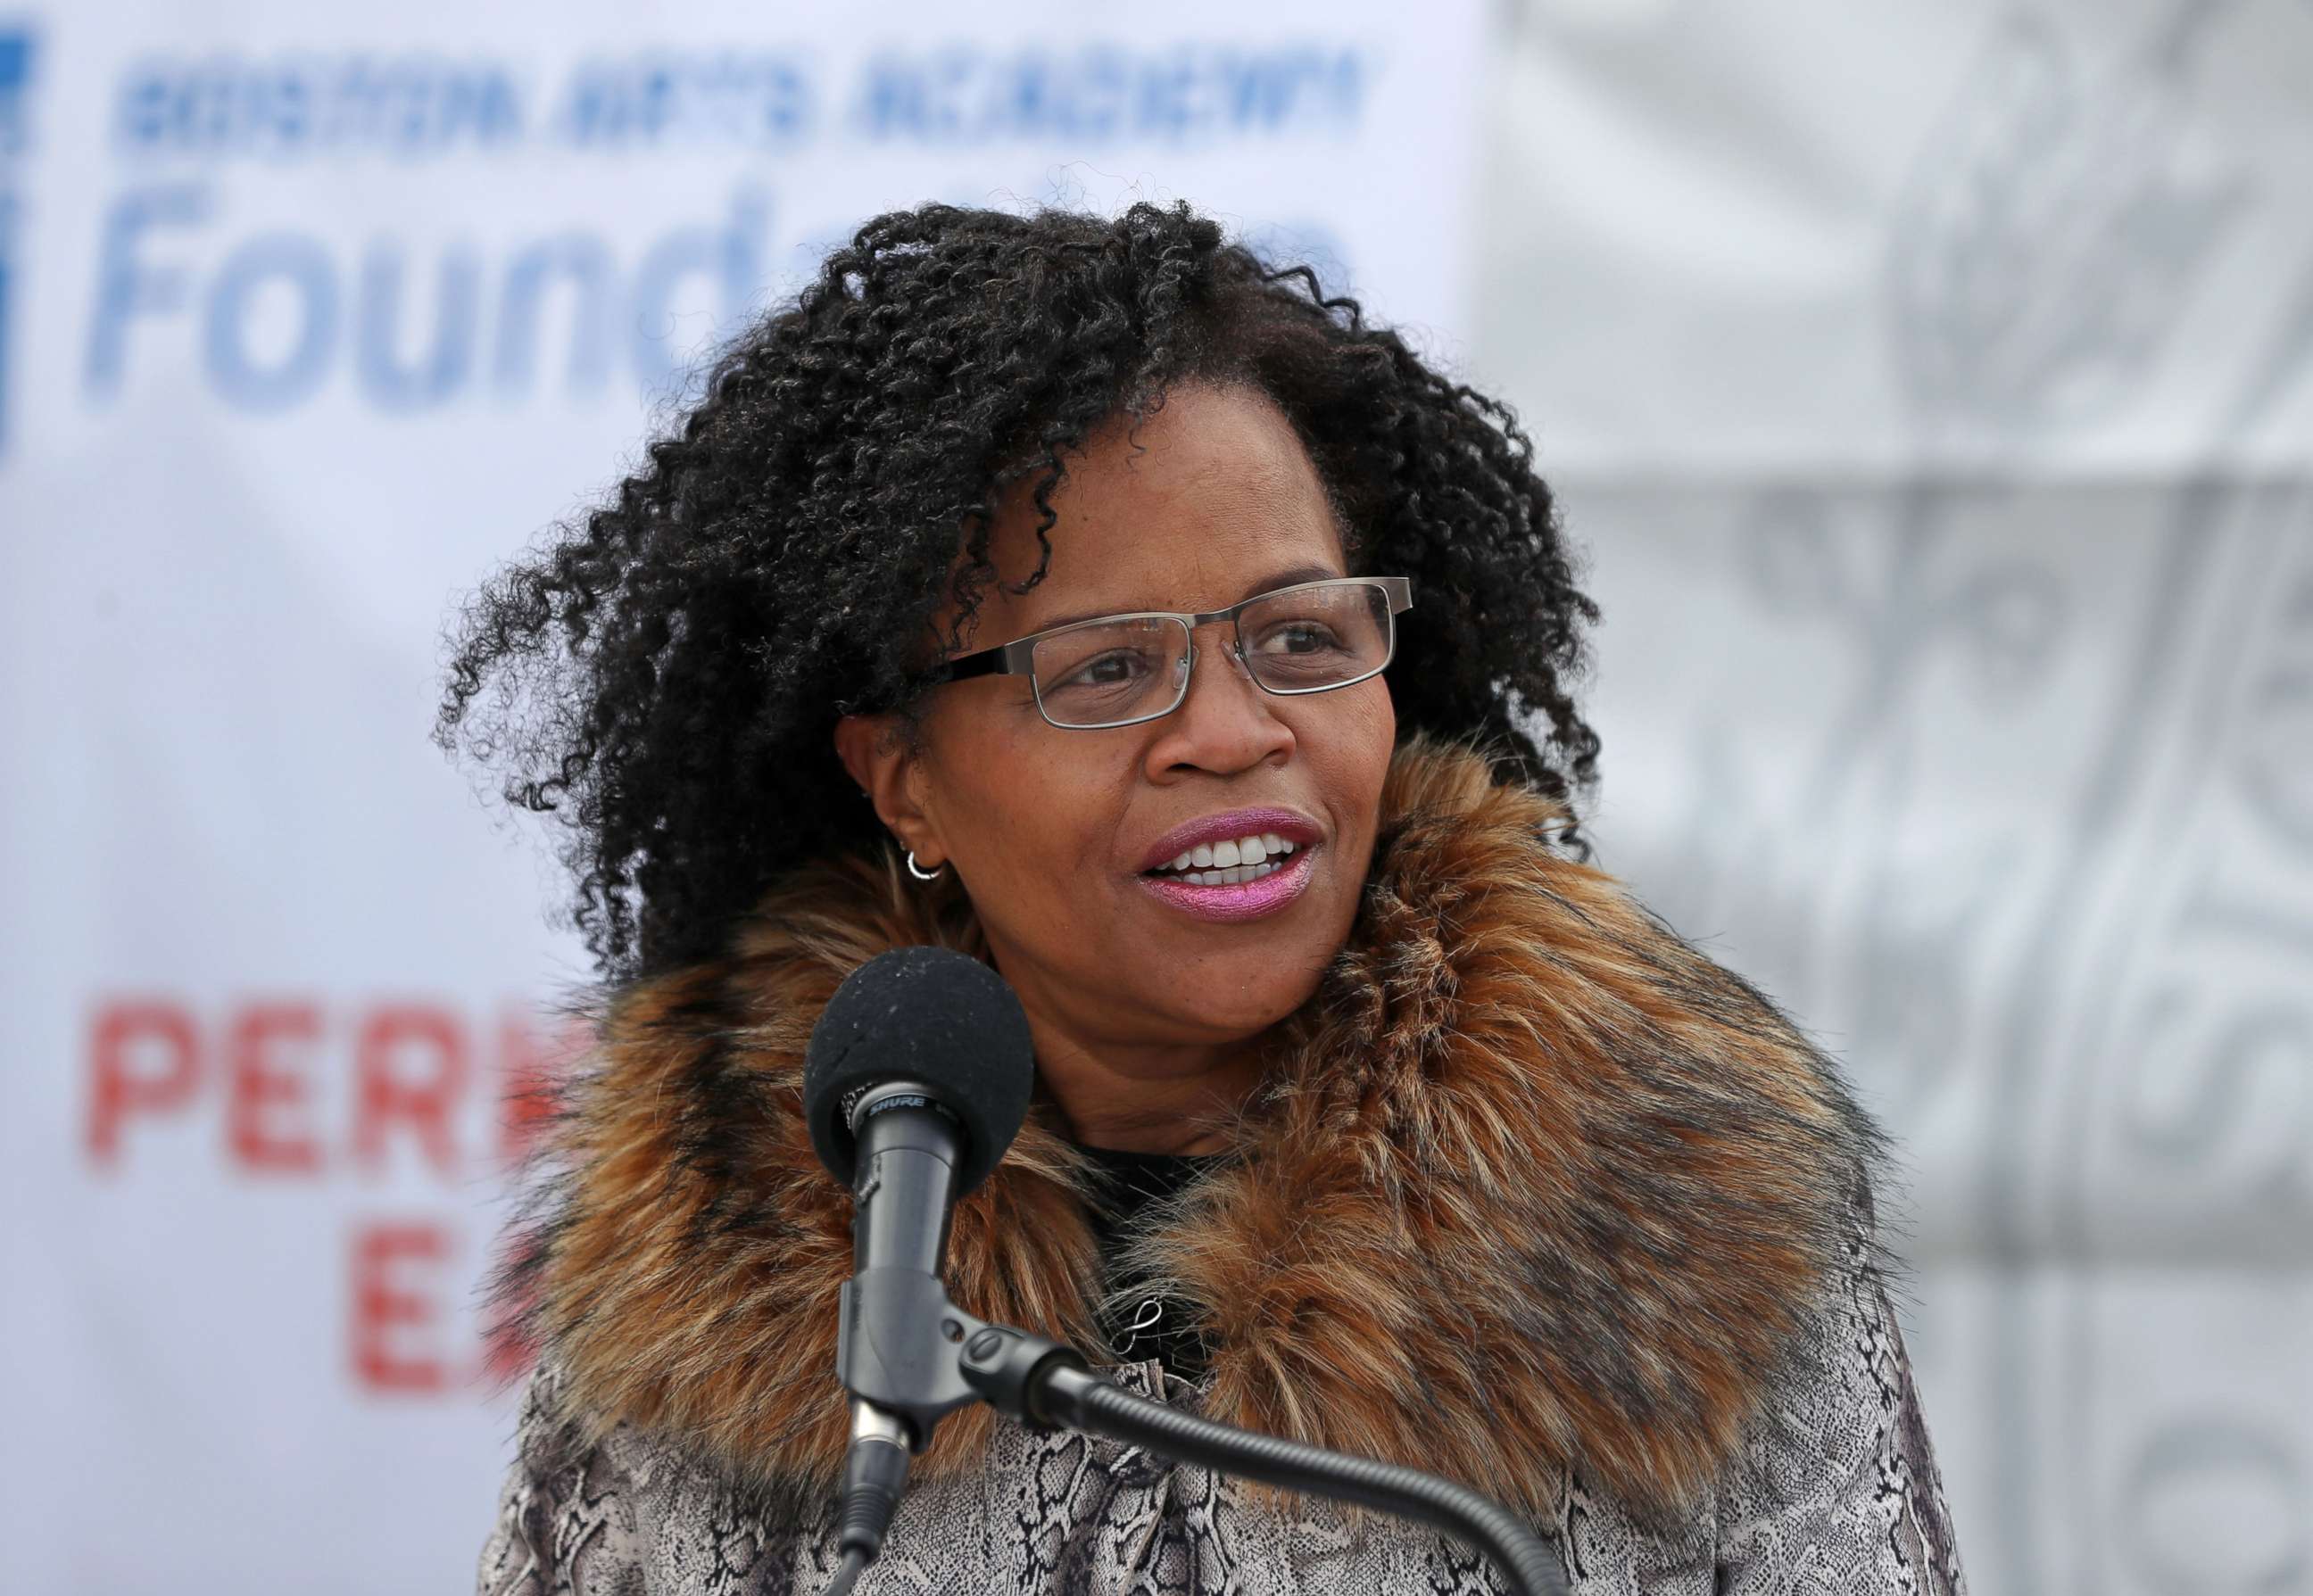 PHOTO: Kim Janey speaks during an event in Boston, Feb. 23, 2021.